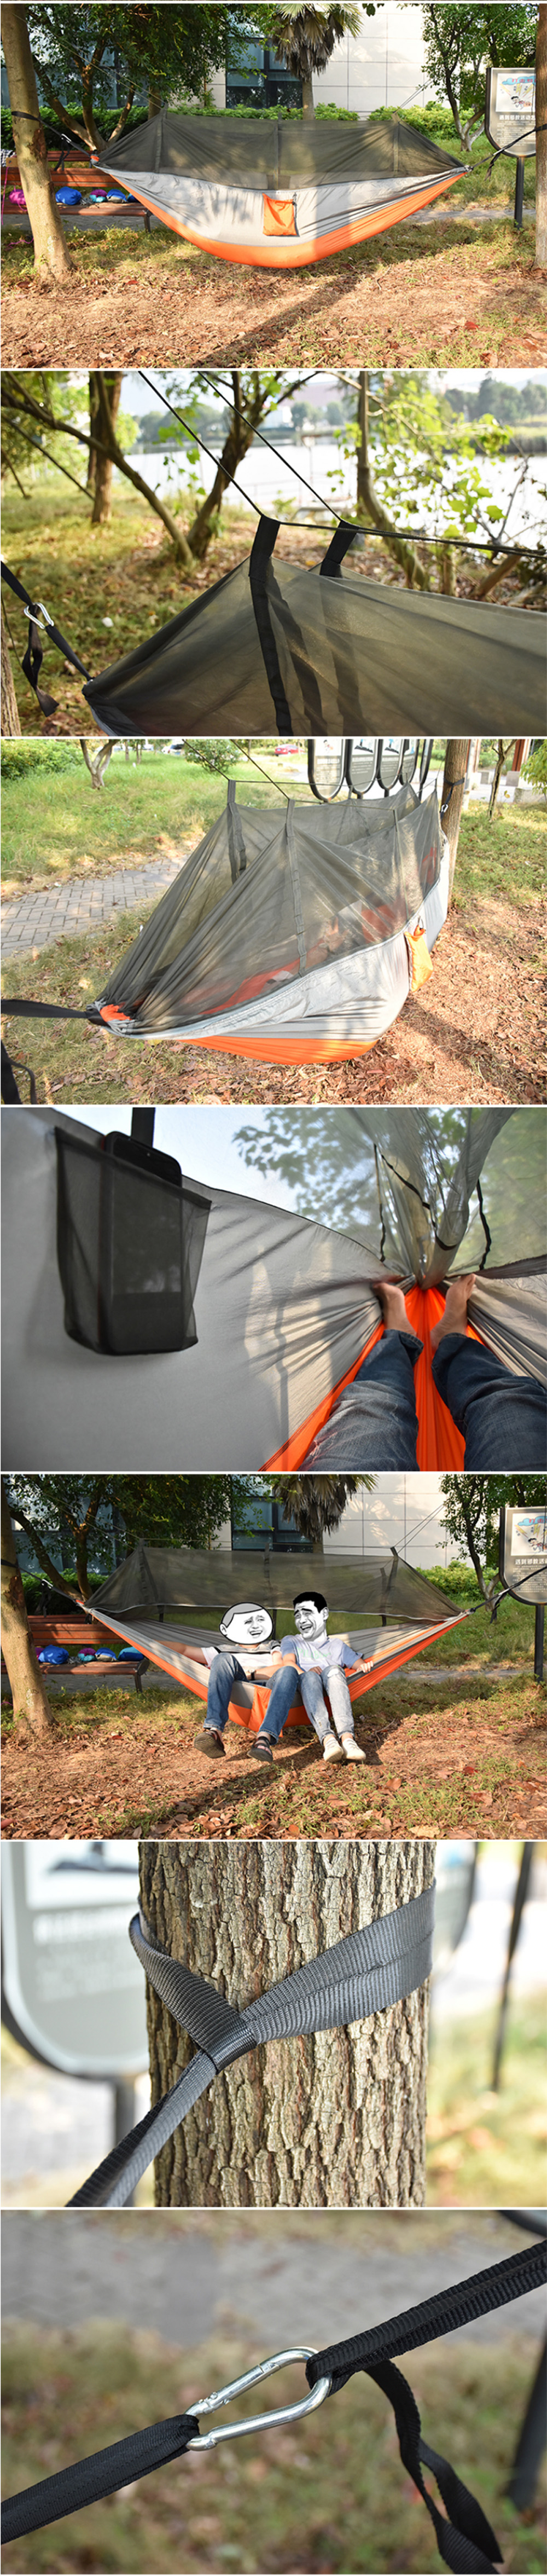 Outdoor-Camping-Lightweight-Picnic-Hammock-with-Mosquito-Net-1-2-Person-Portable-Backpack-Hammock-Sl-1702591-3